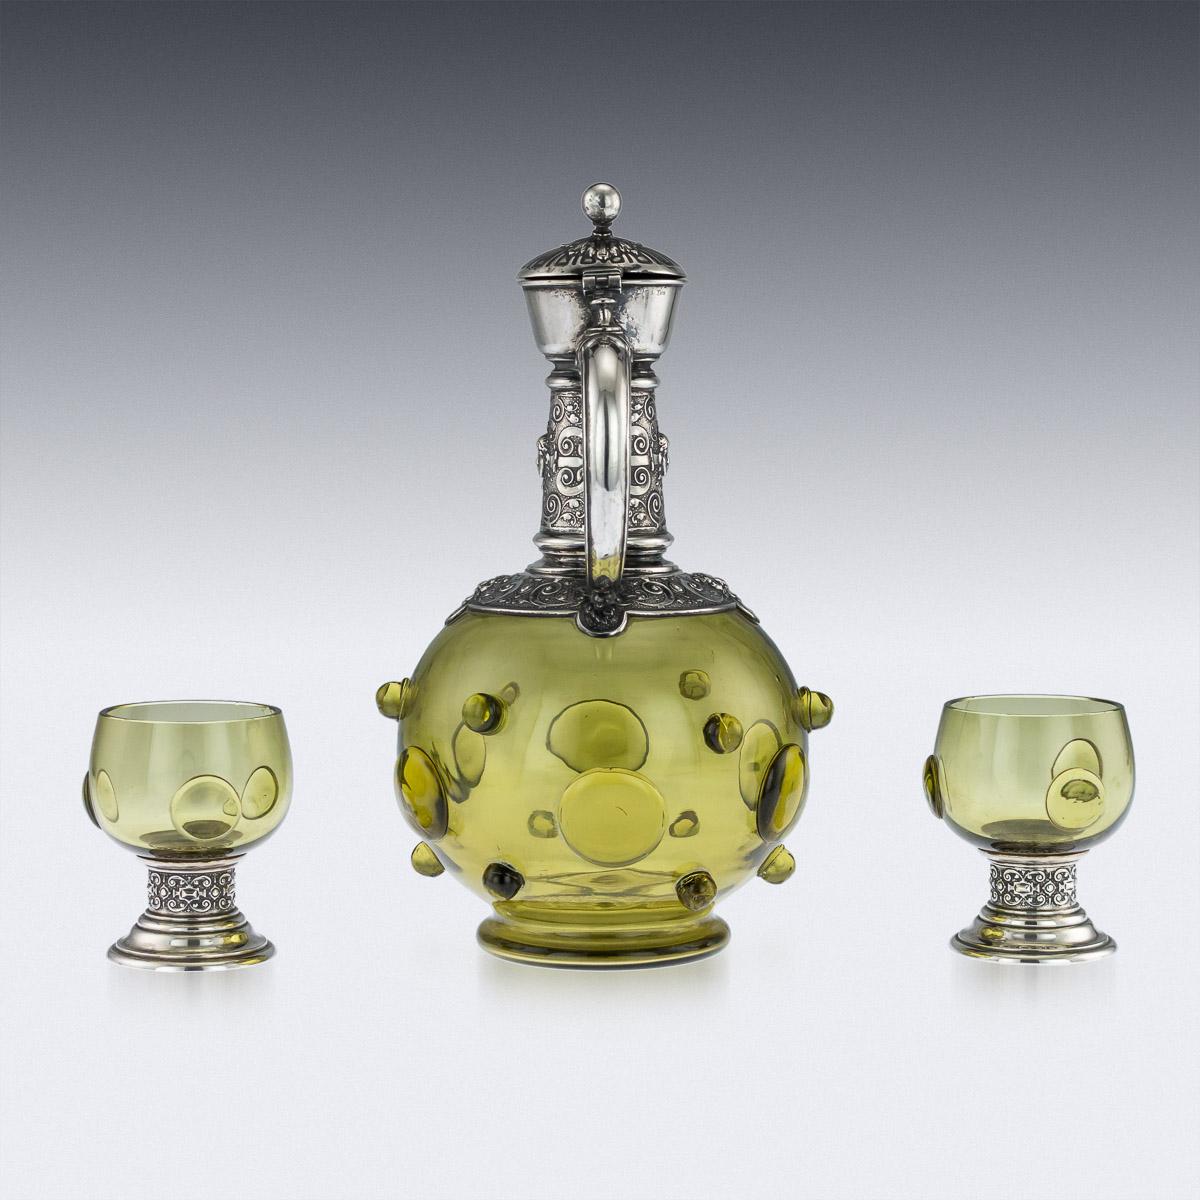 Antique late-19th century German solid silver and green glass decorative wine claret jug and pair of goblets, bulbous green glass body applied with unusual ball decoration, the silver mount is chased with Cellini inspired classical motifs, c-shaped